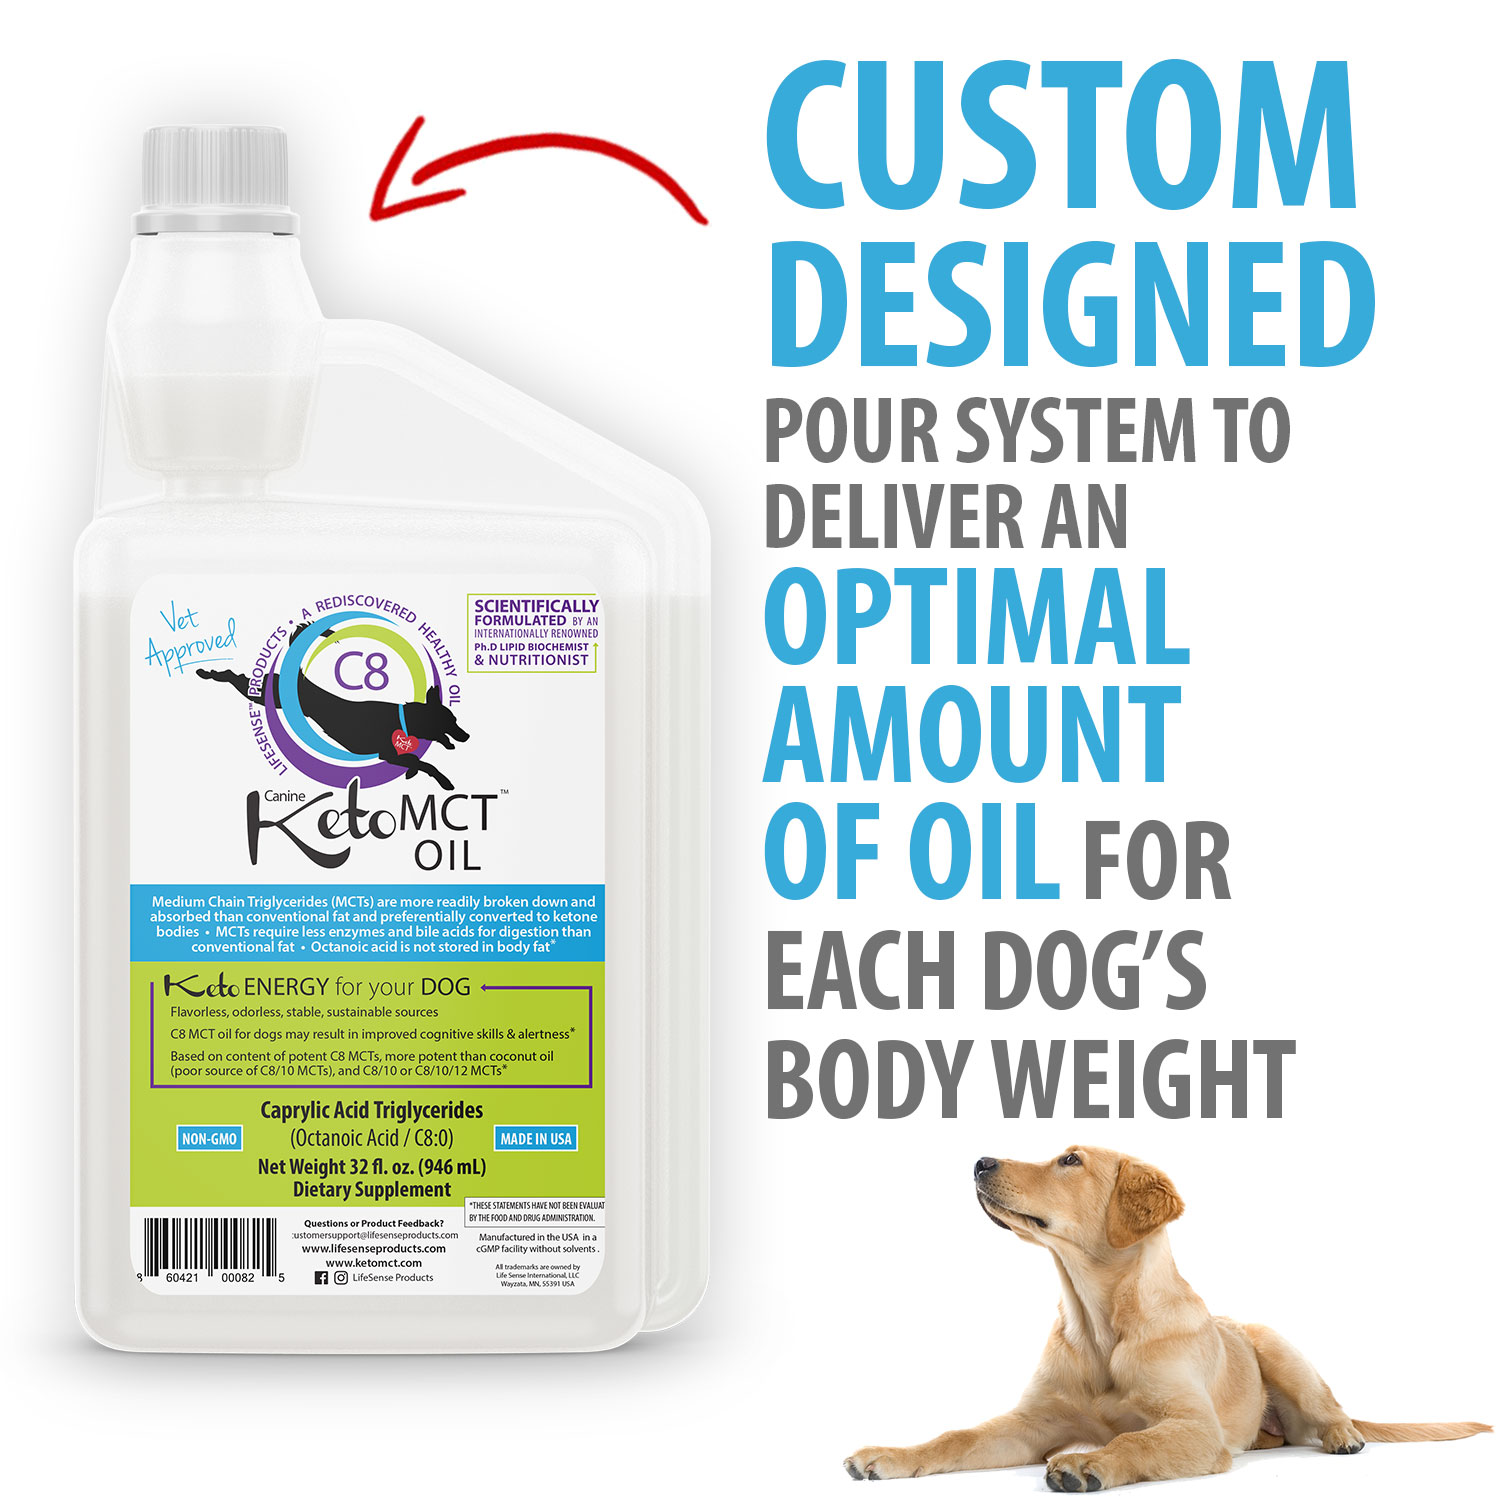 Custom bottle is designed to deliver the right dose for the dog.